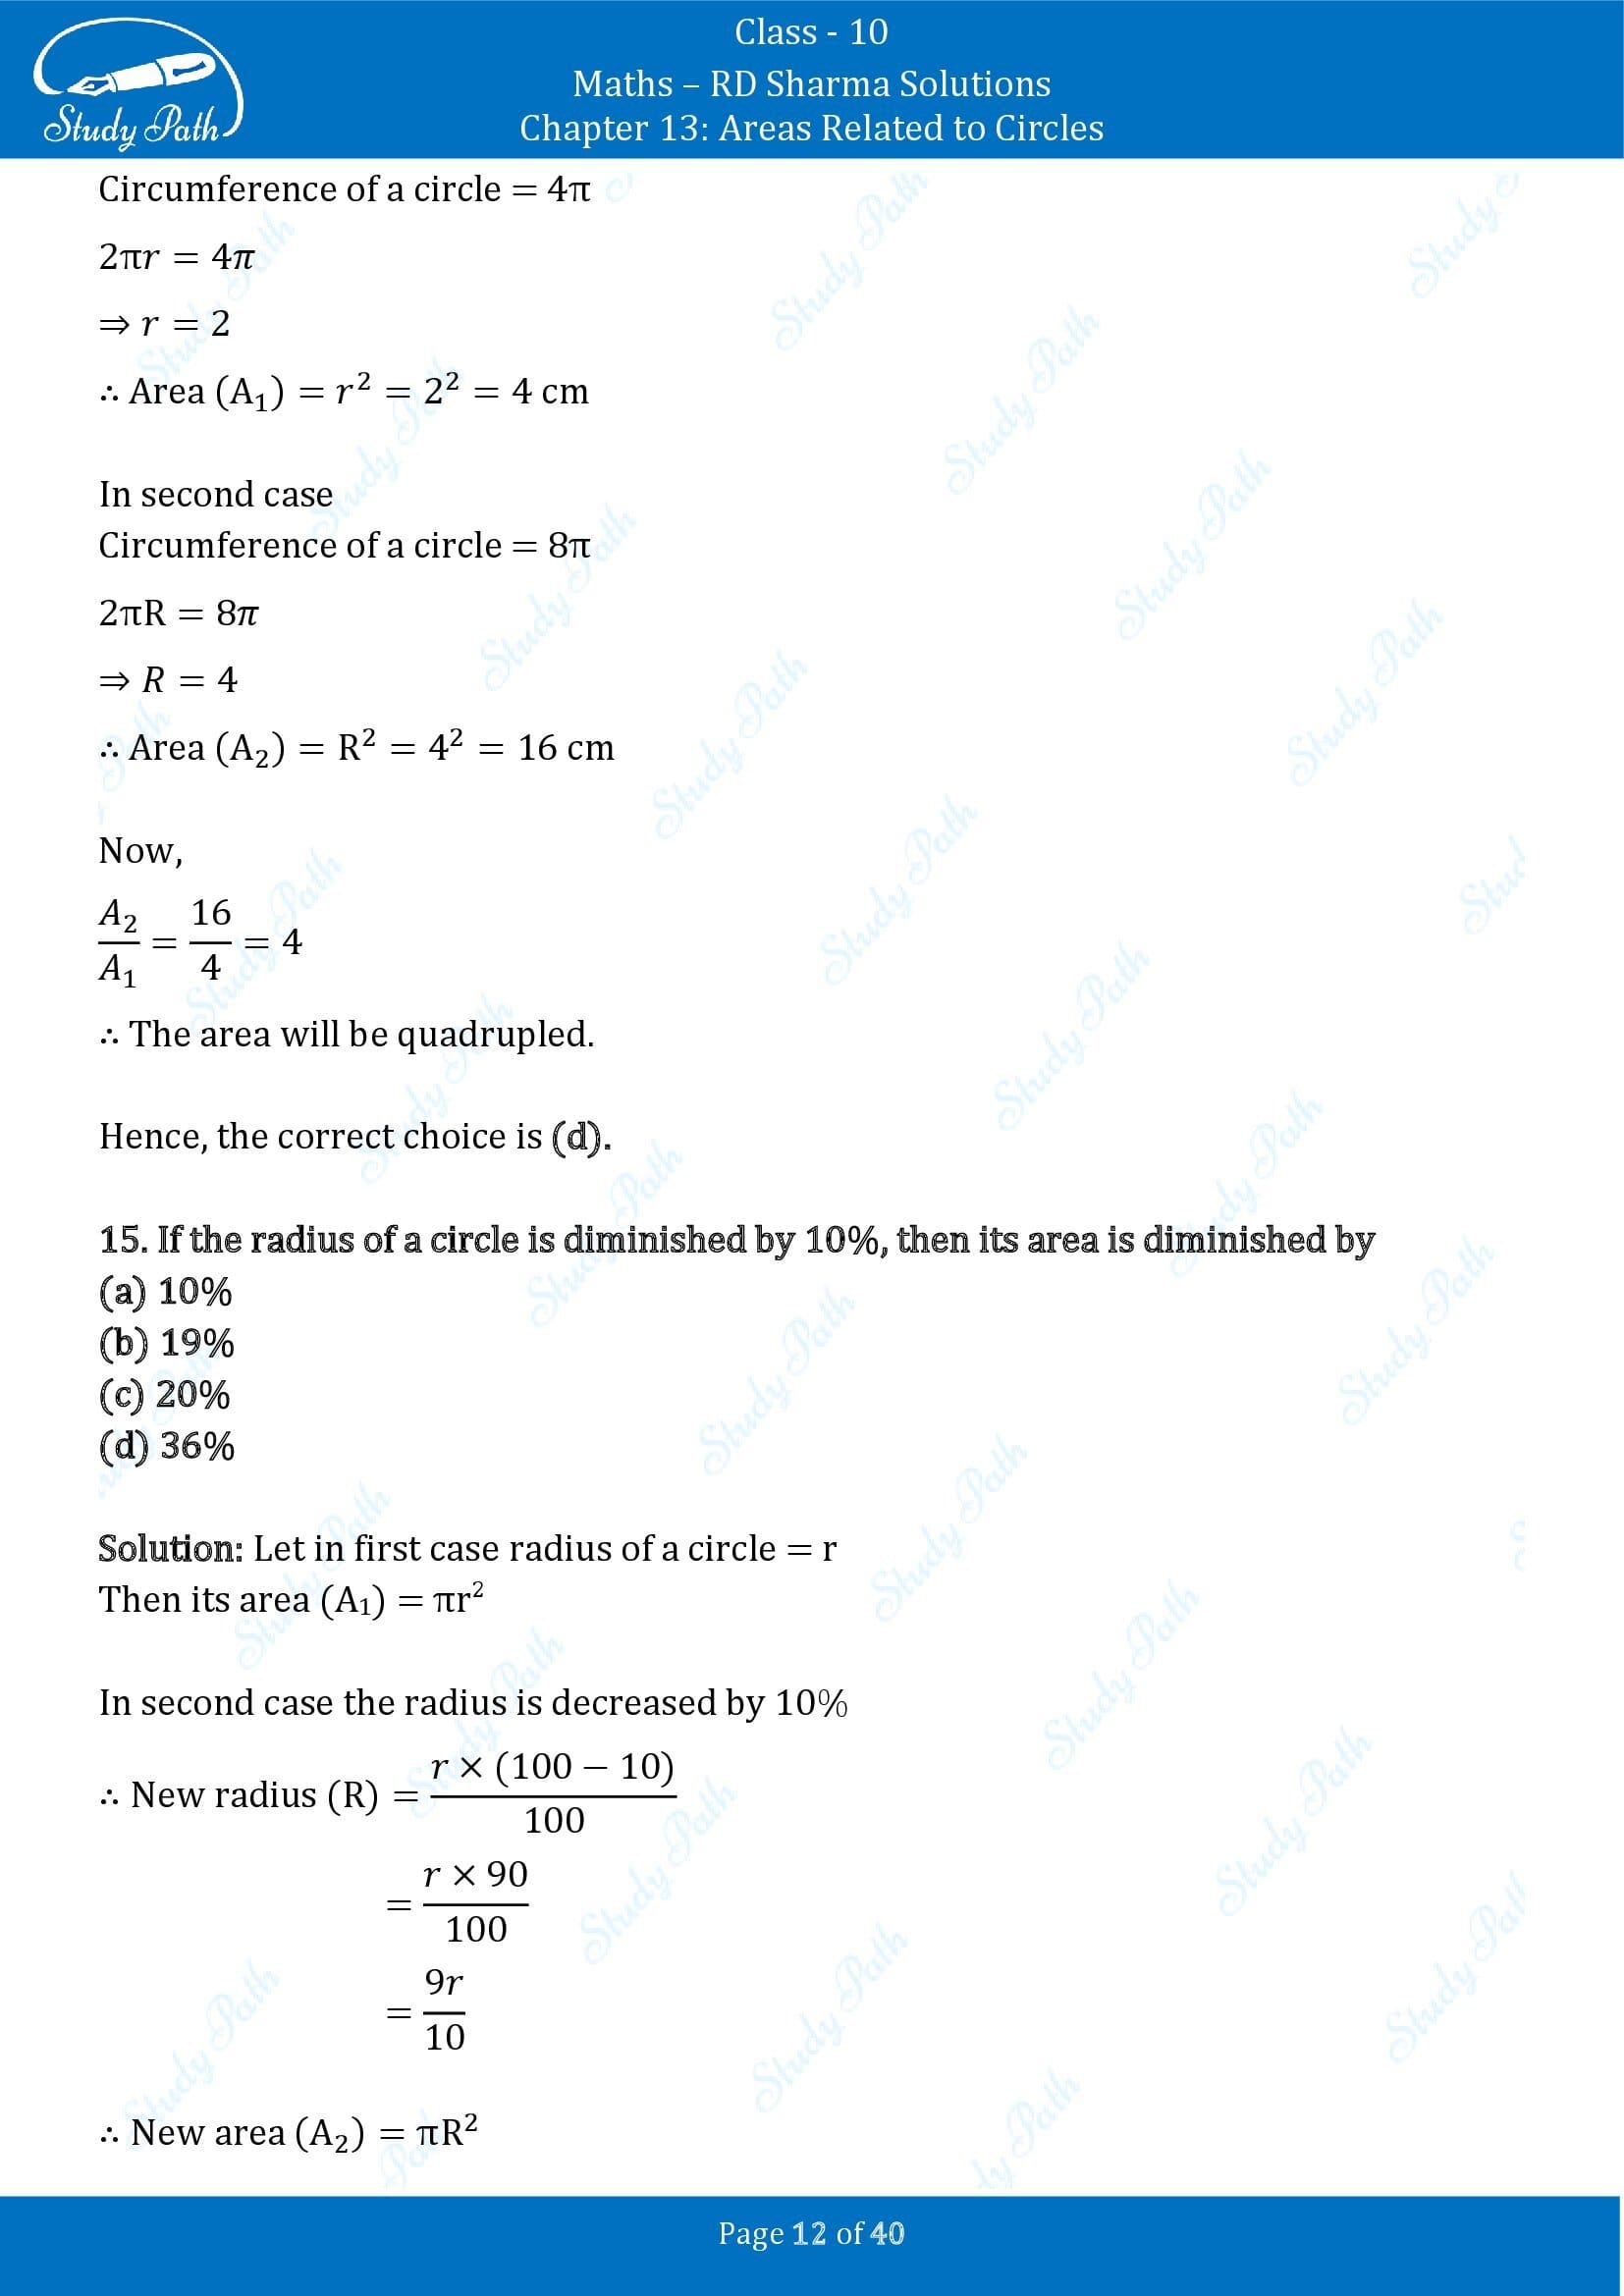 RD Sharma Solutions Class 10 Chapter 13 Areas Related to Circles Multiple Choice Question MCQs 00012